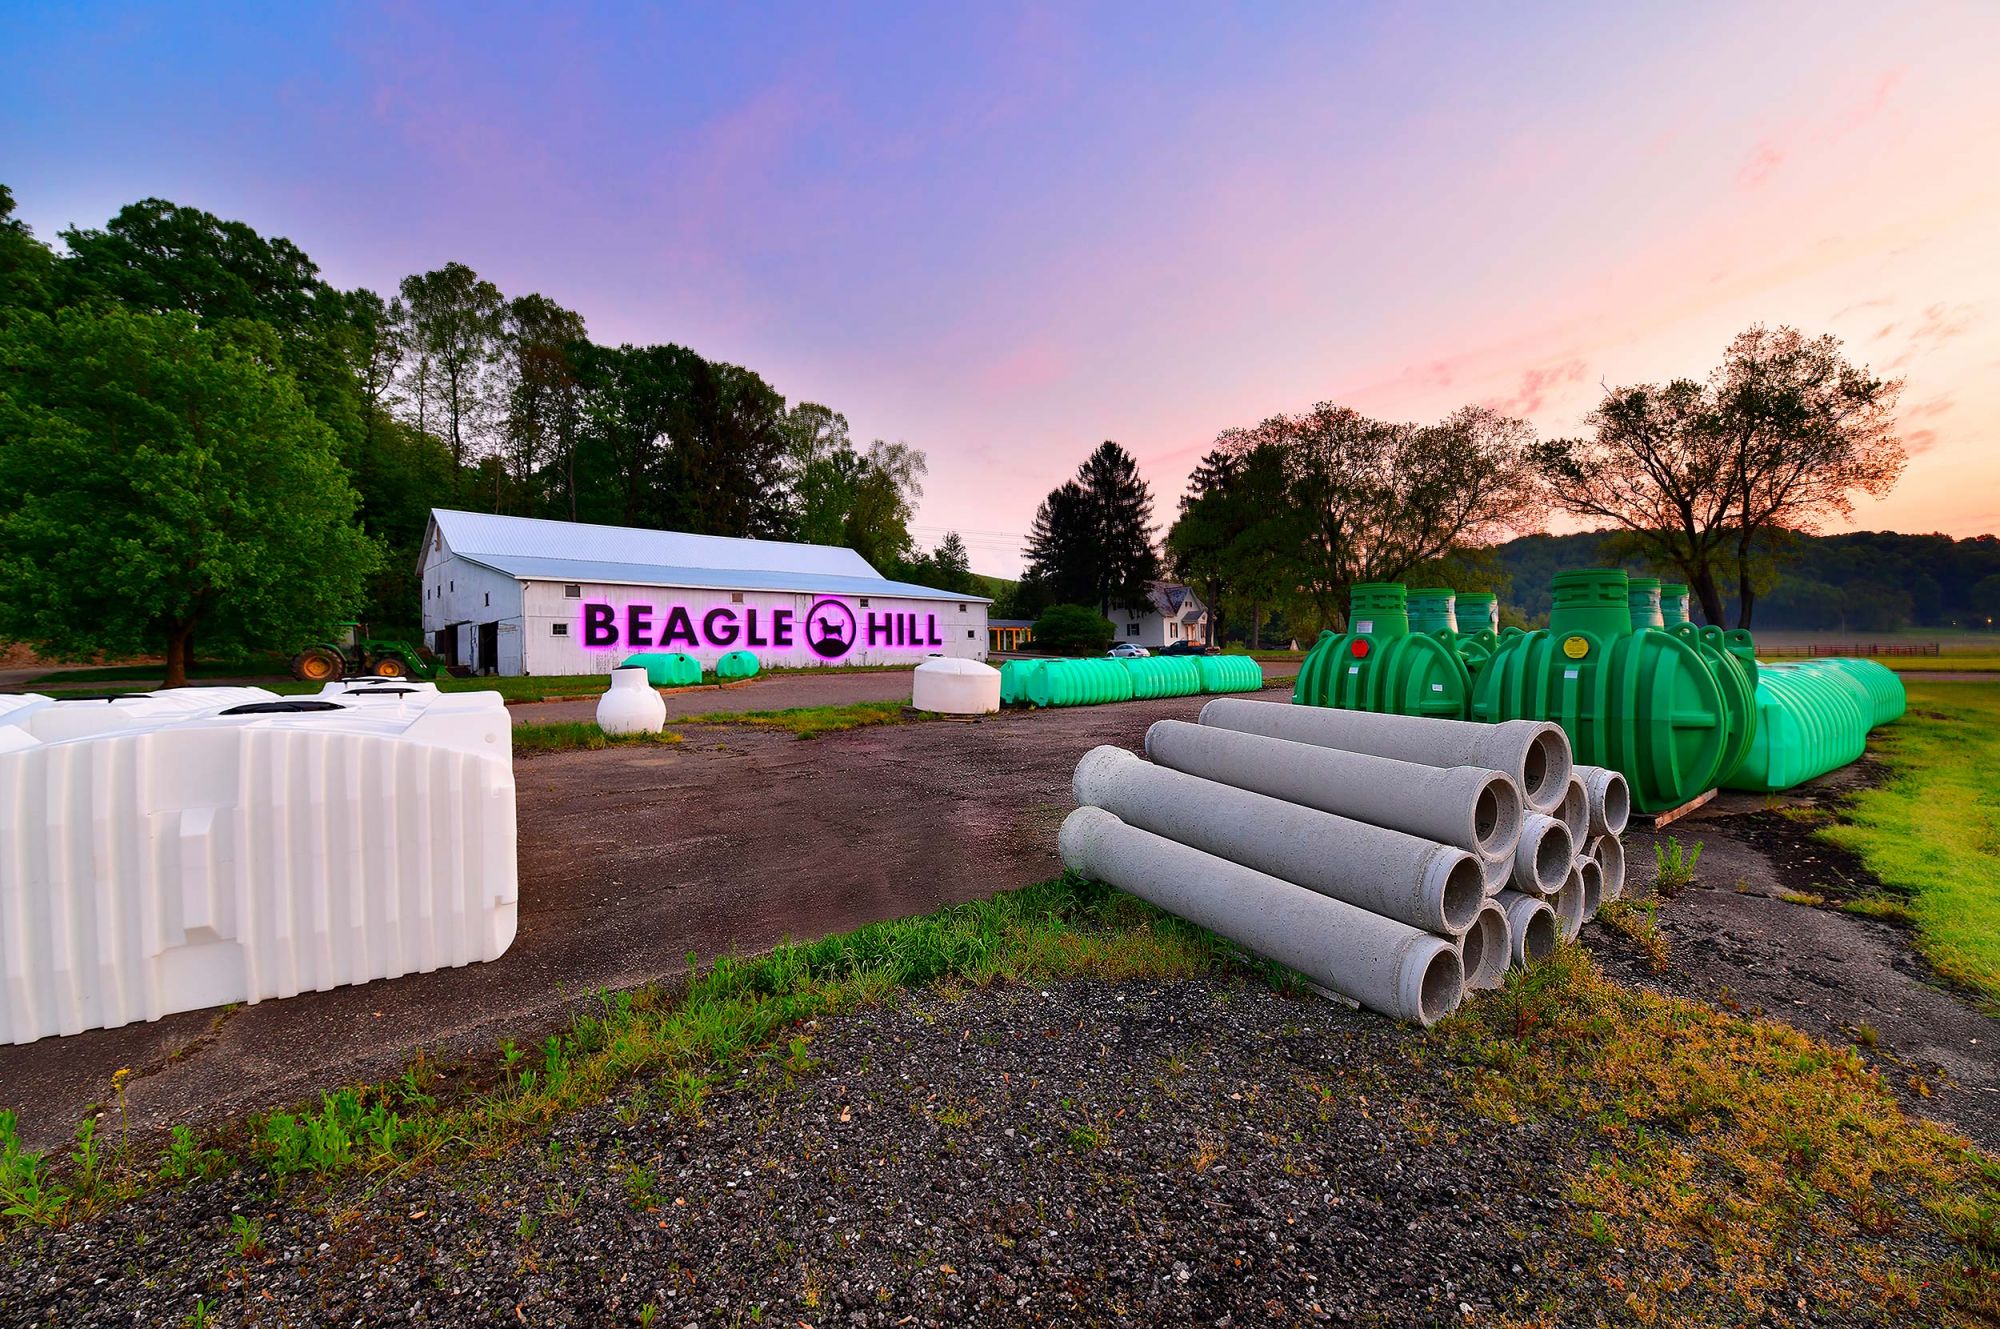 Beagle Hill Services Pipe and Tank Yard